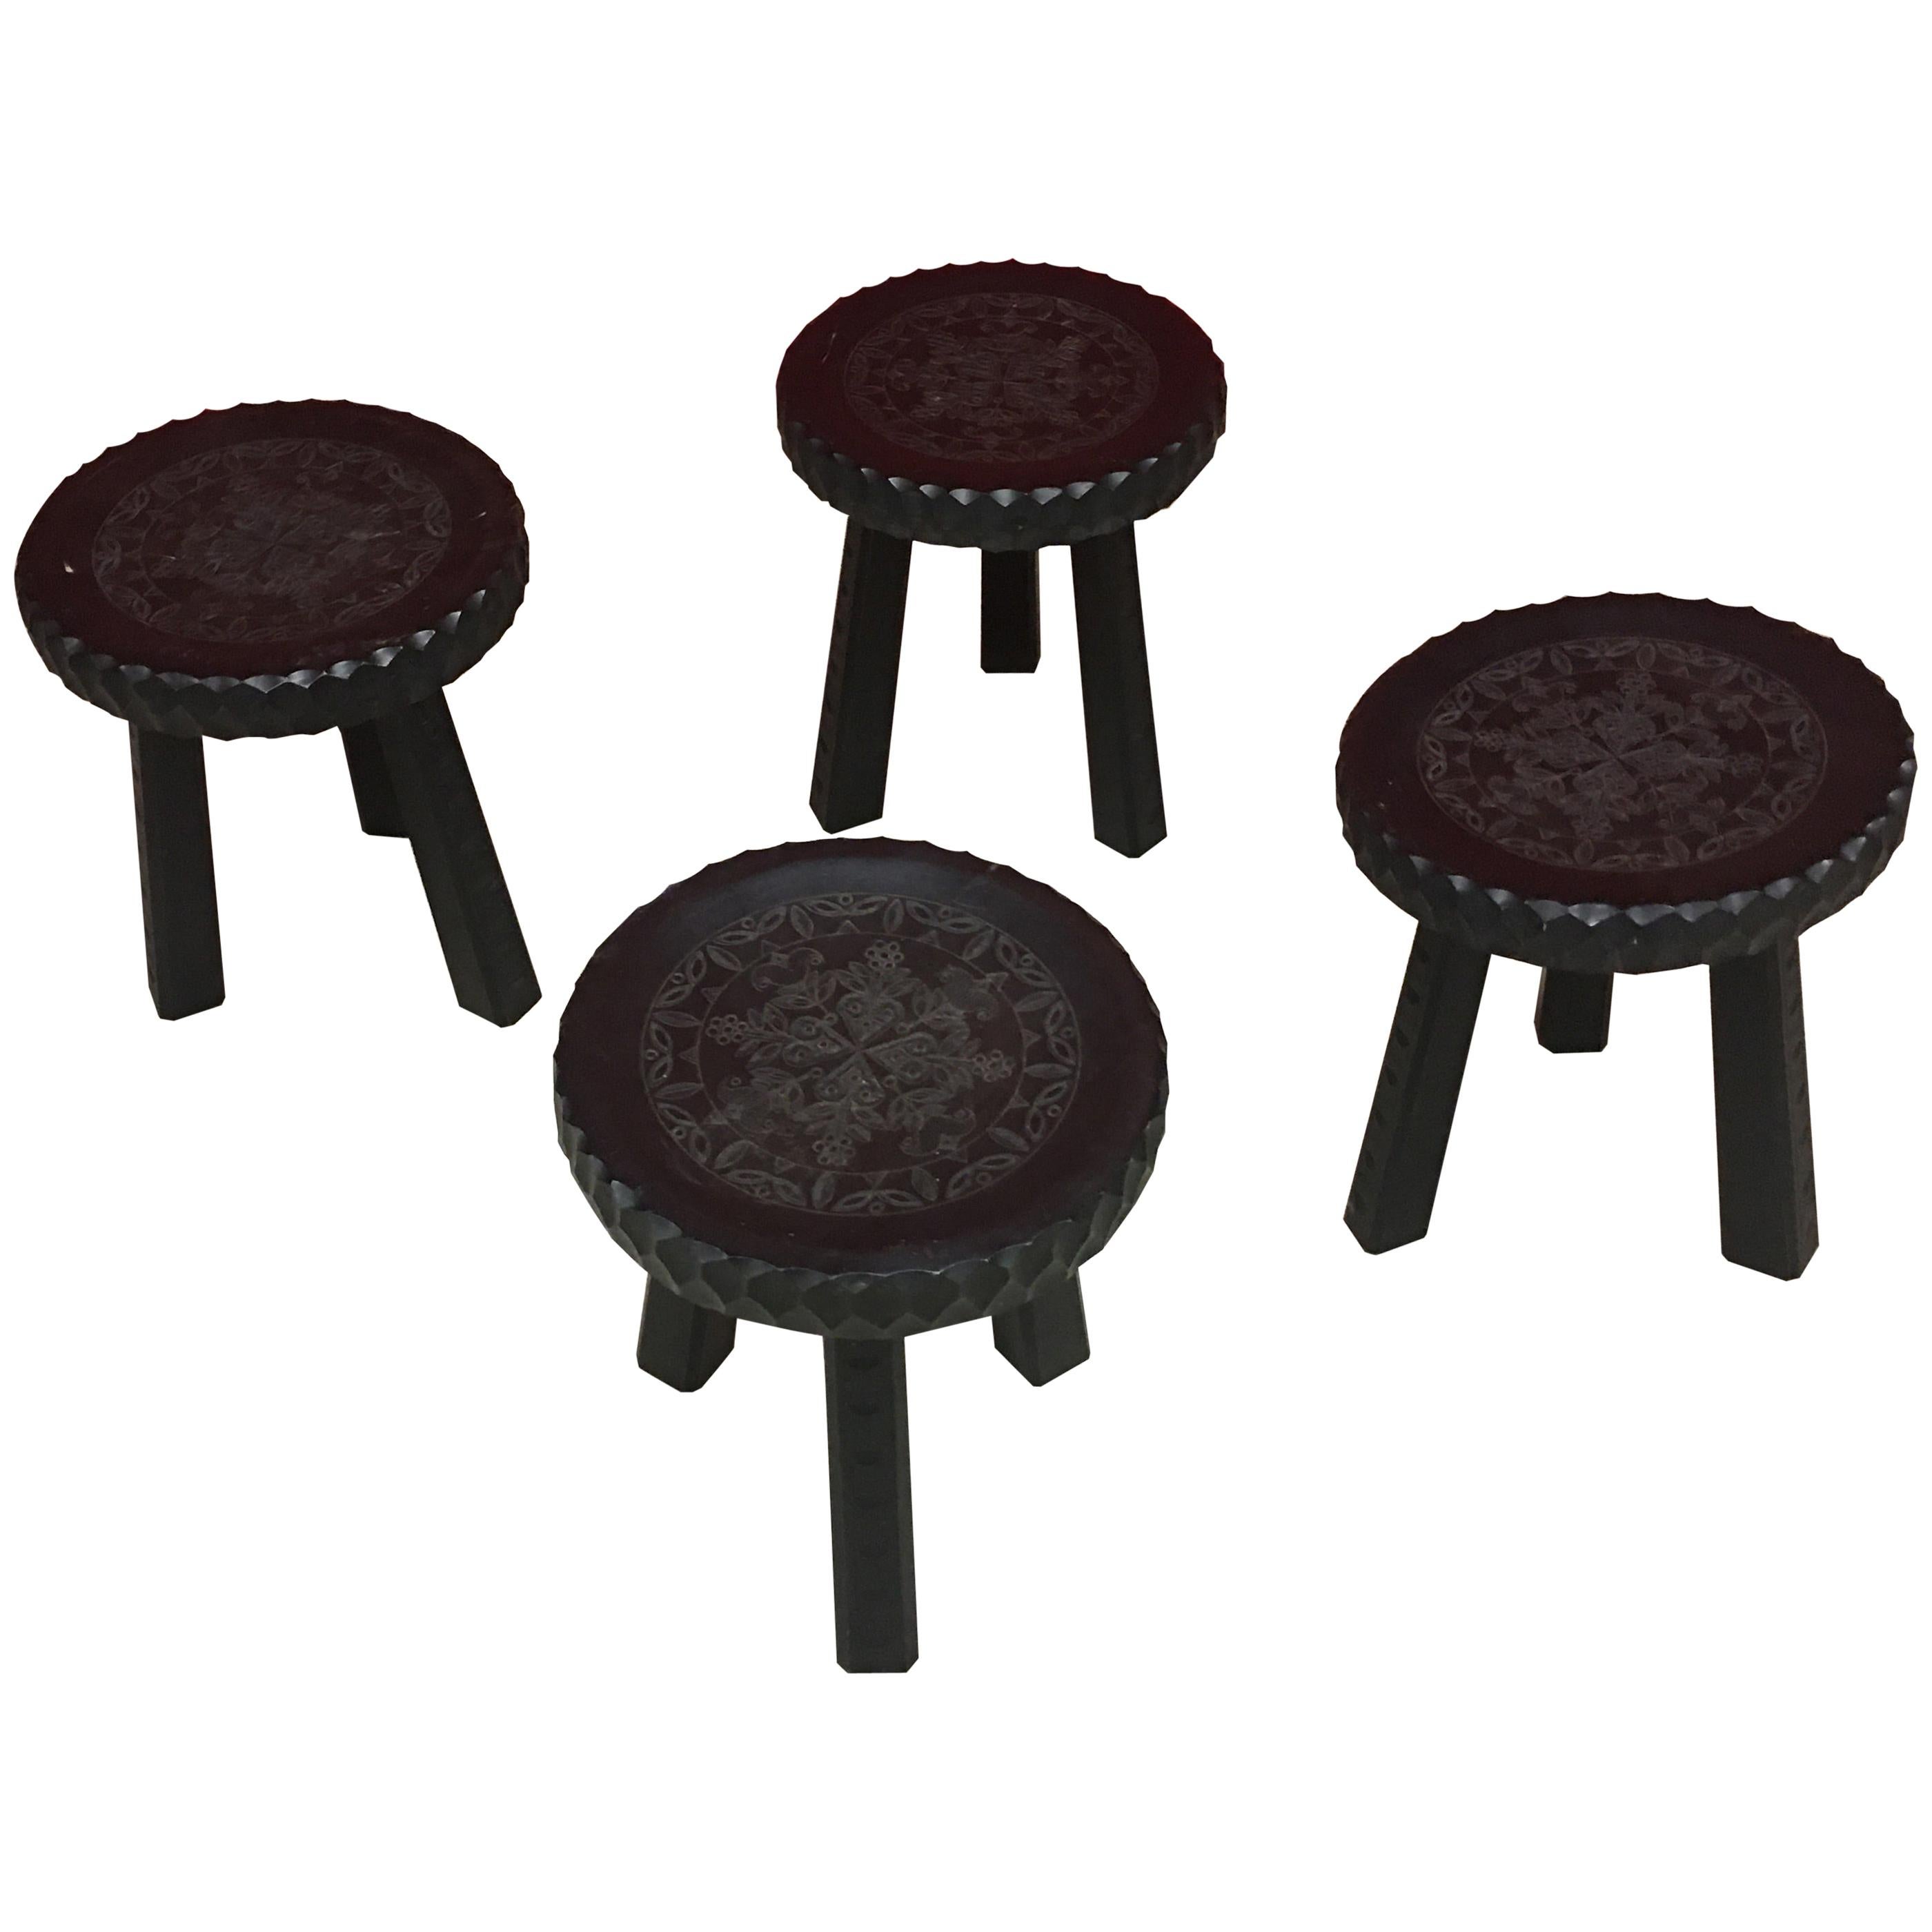 Four Organic Stools in Blackened Wood, circa 1950-1960 For Sale